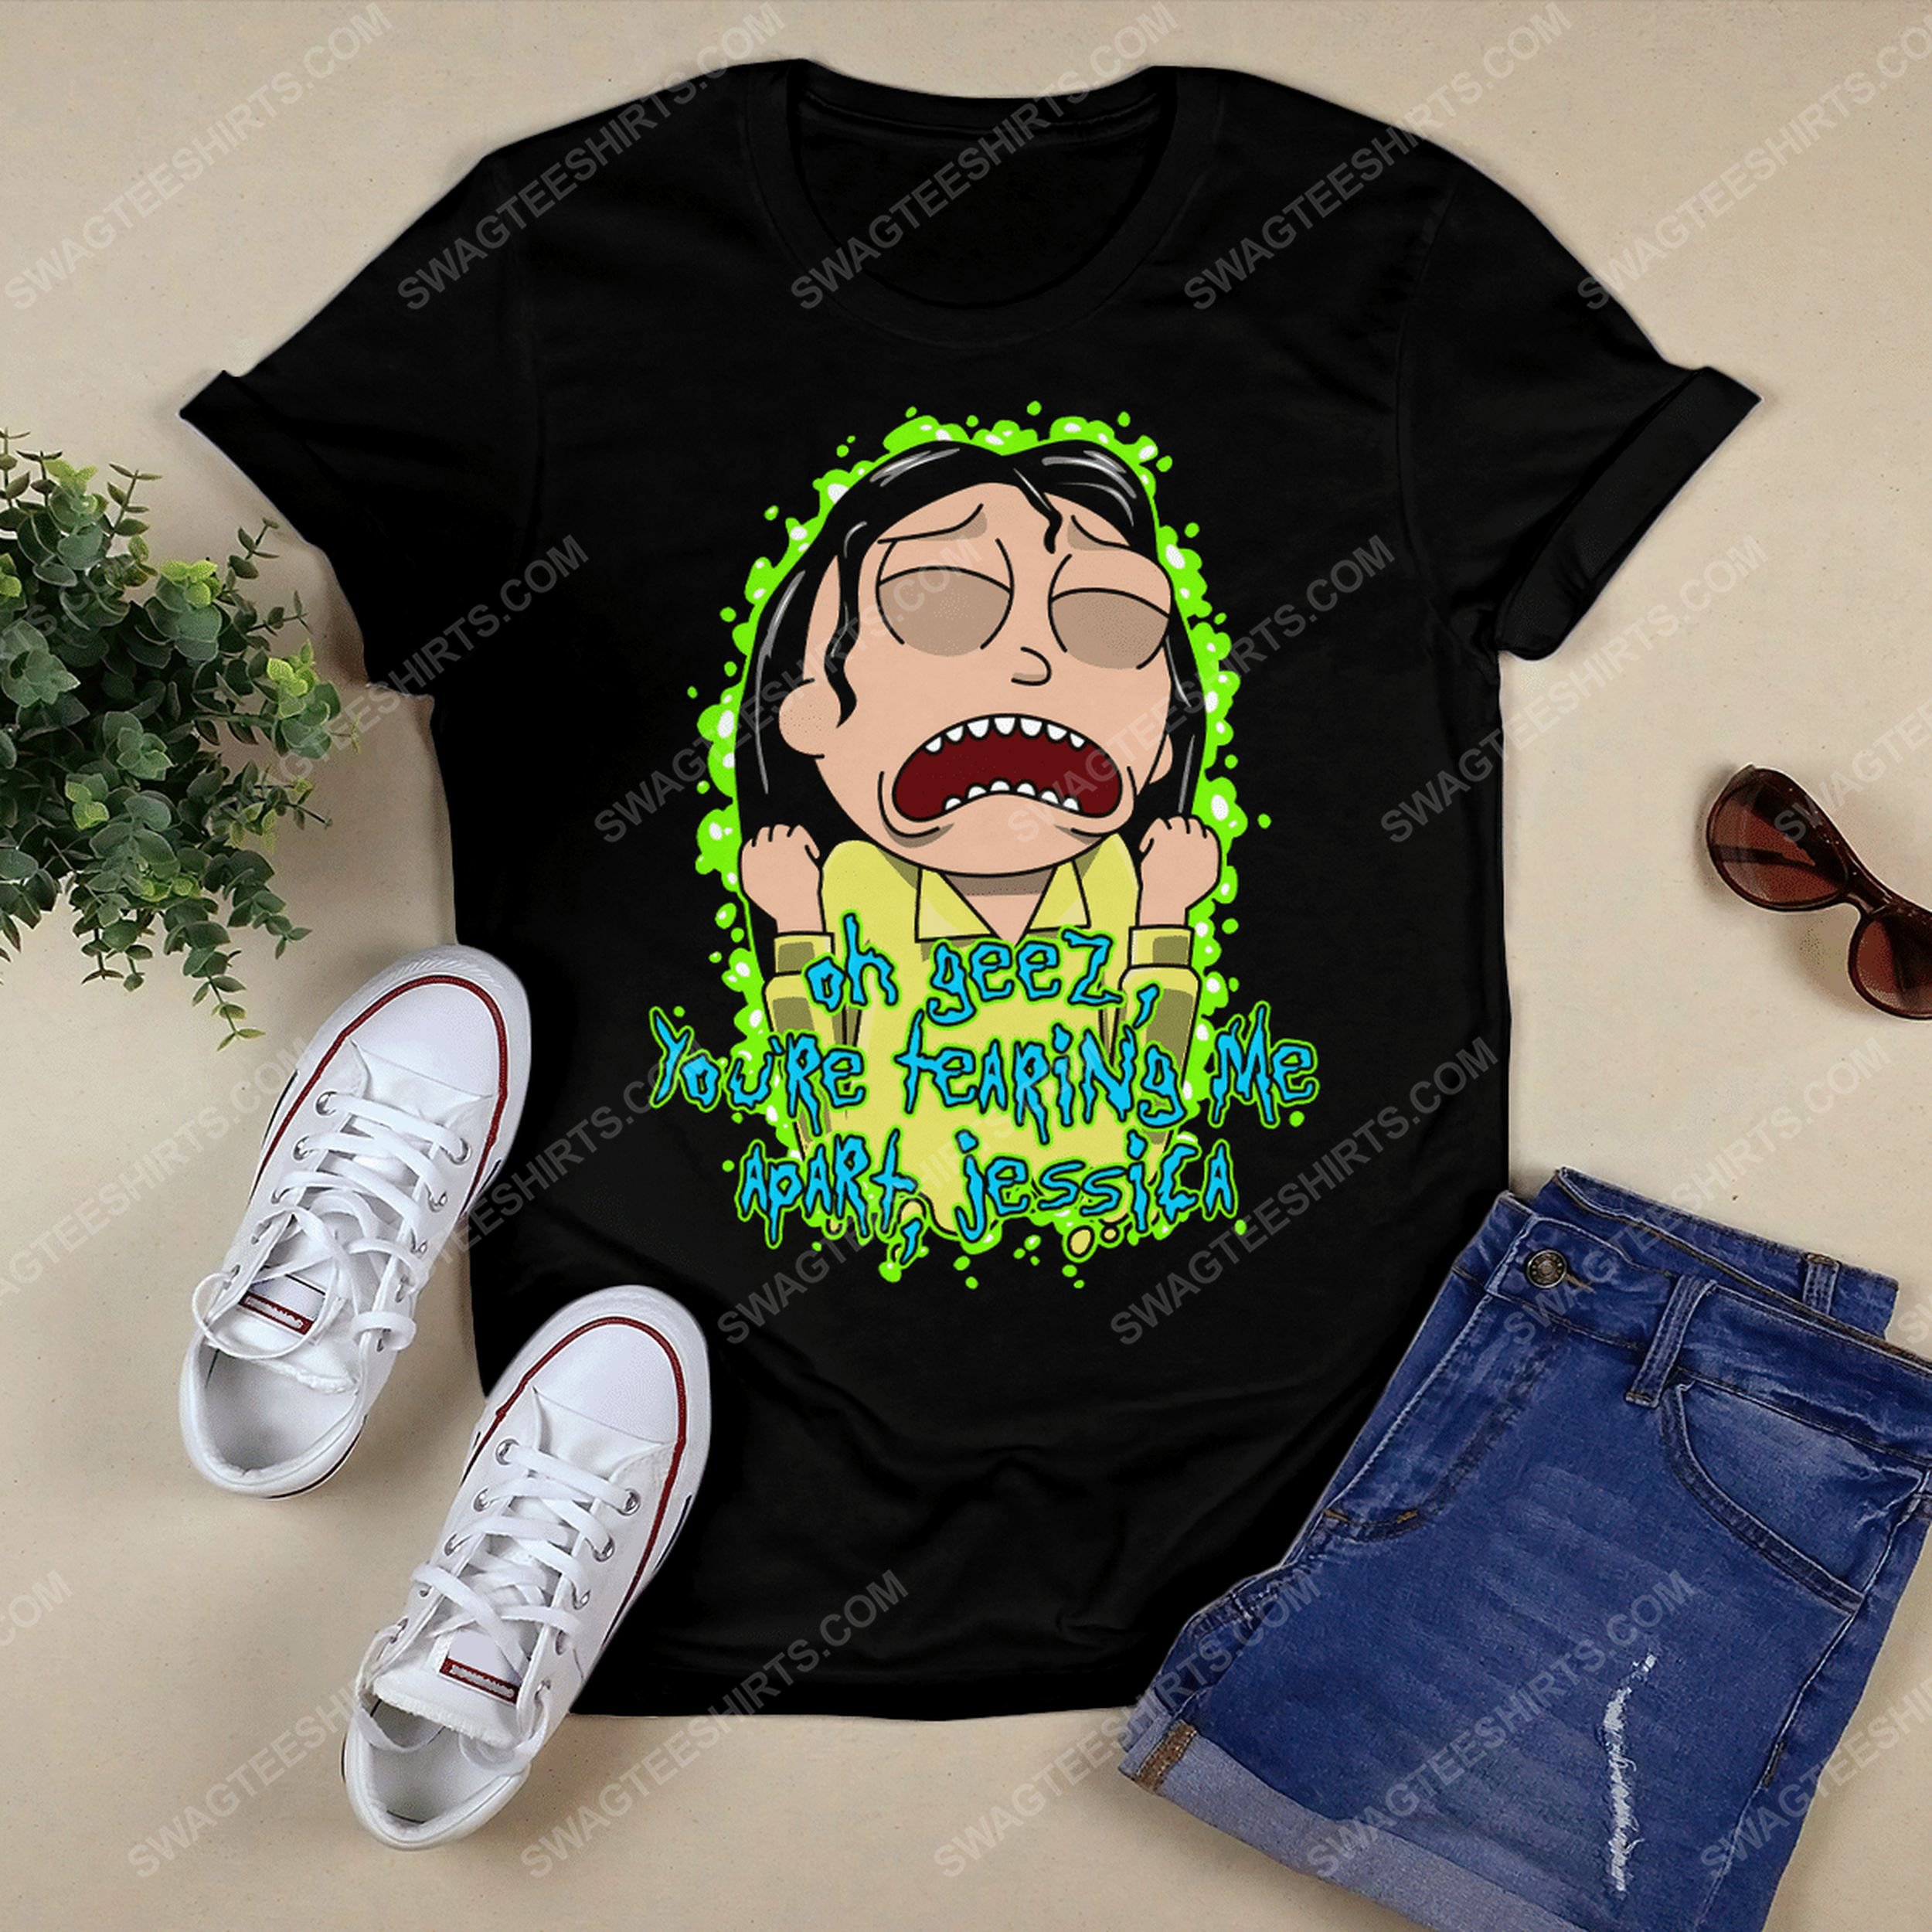 Tv show rick and morty oh geez you're tearing me apart jessica shirt 2(1)